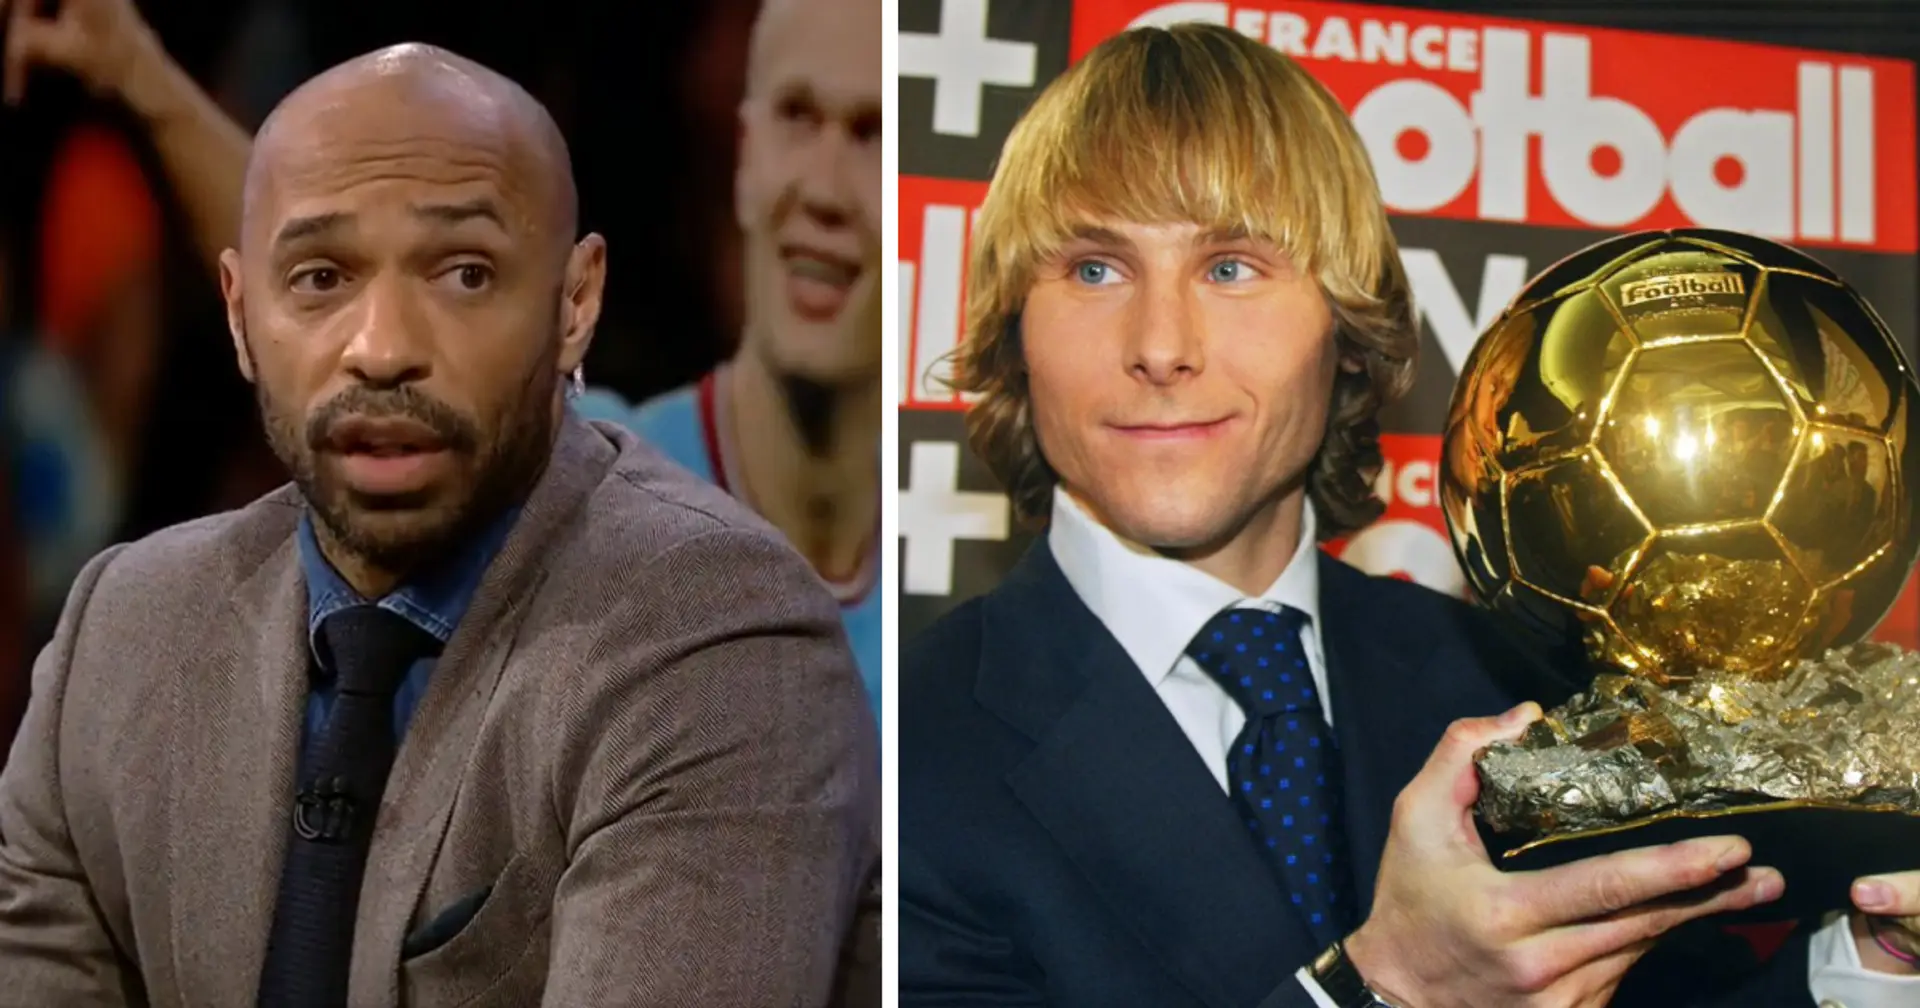 'They vote for whoever they want': Thierry Henry finally speaks about not winning the Ballon d'Or in 2003